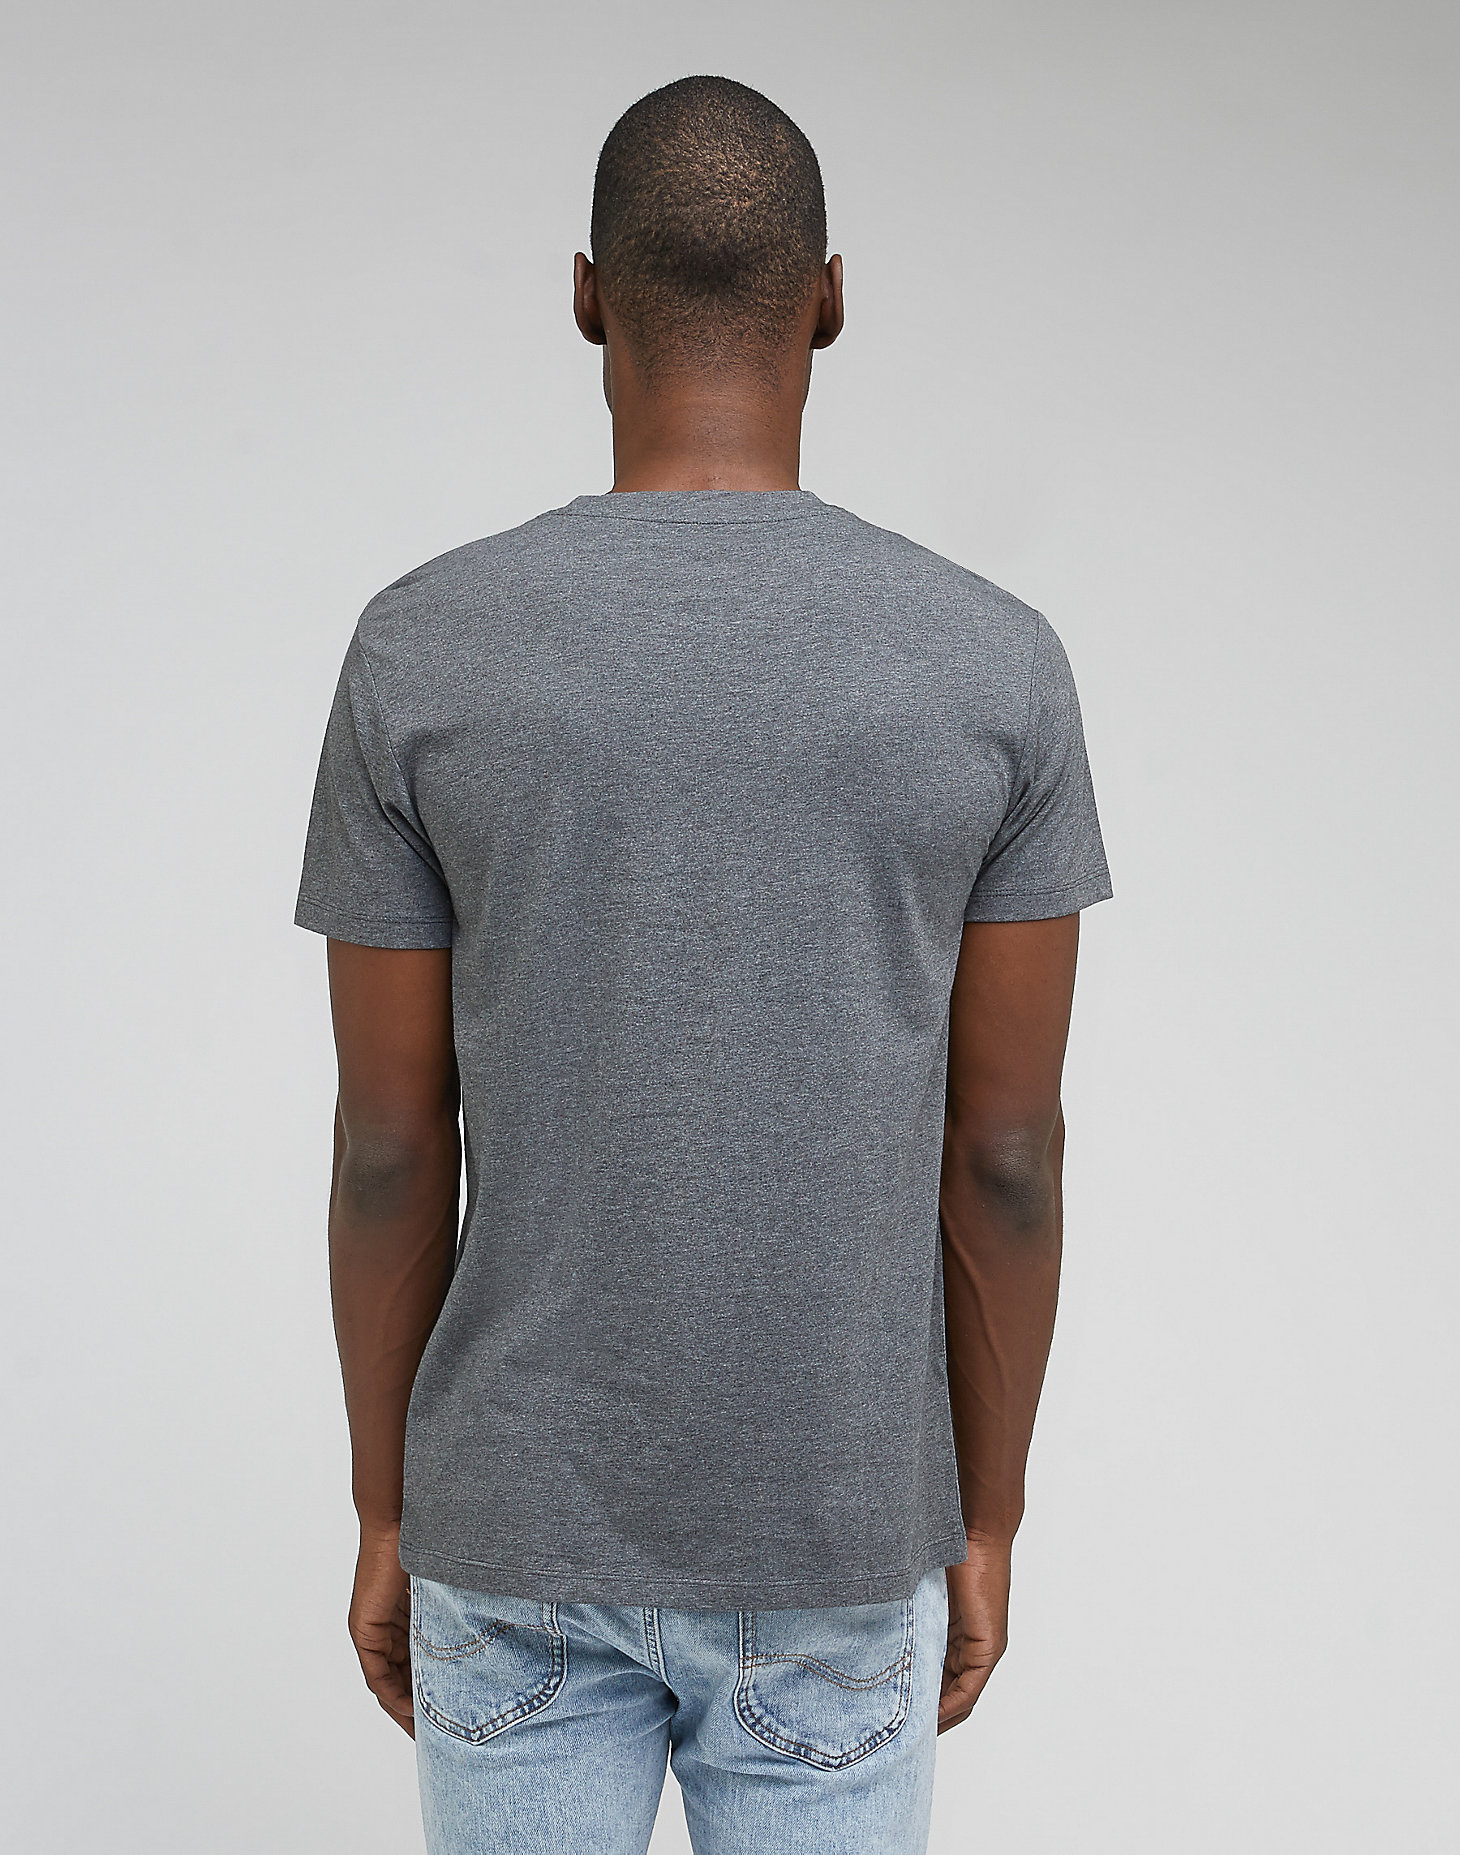 Ultimate Pocket Tee in Washed Black alternative view 1